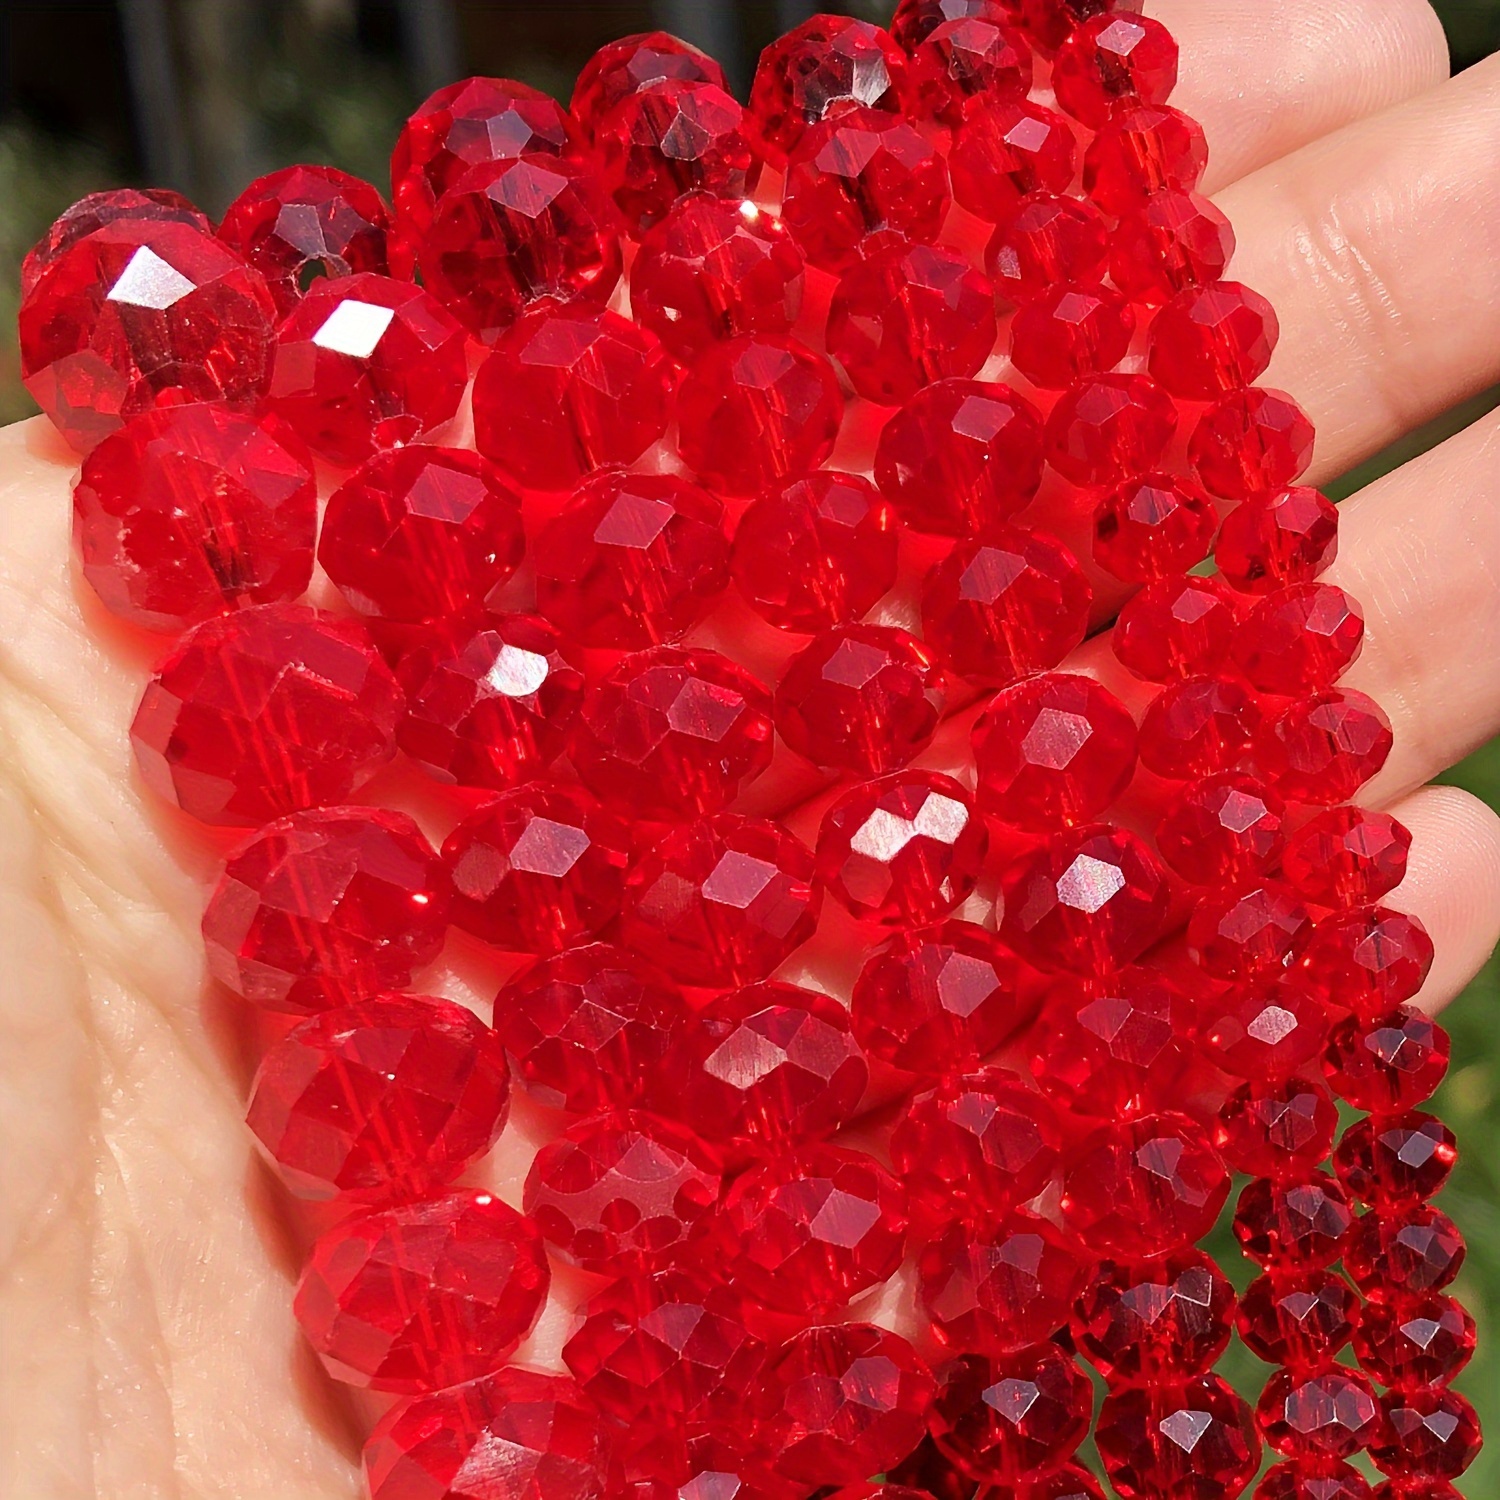 3mm~8mm Red Faux Crystal Beads For DIY Bracelet Necklace Jewelry Accessories